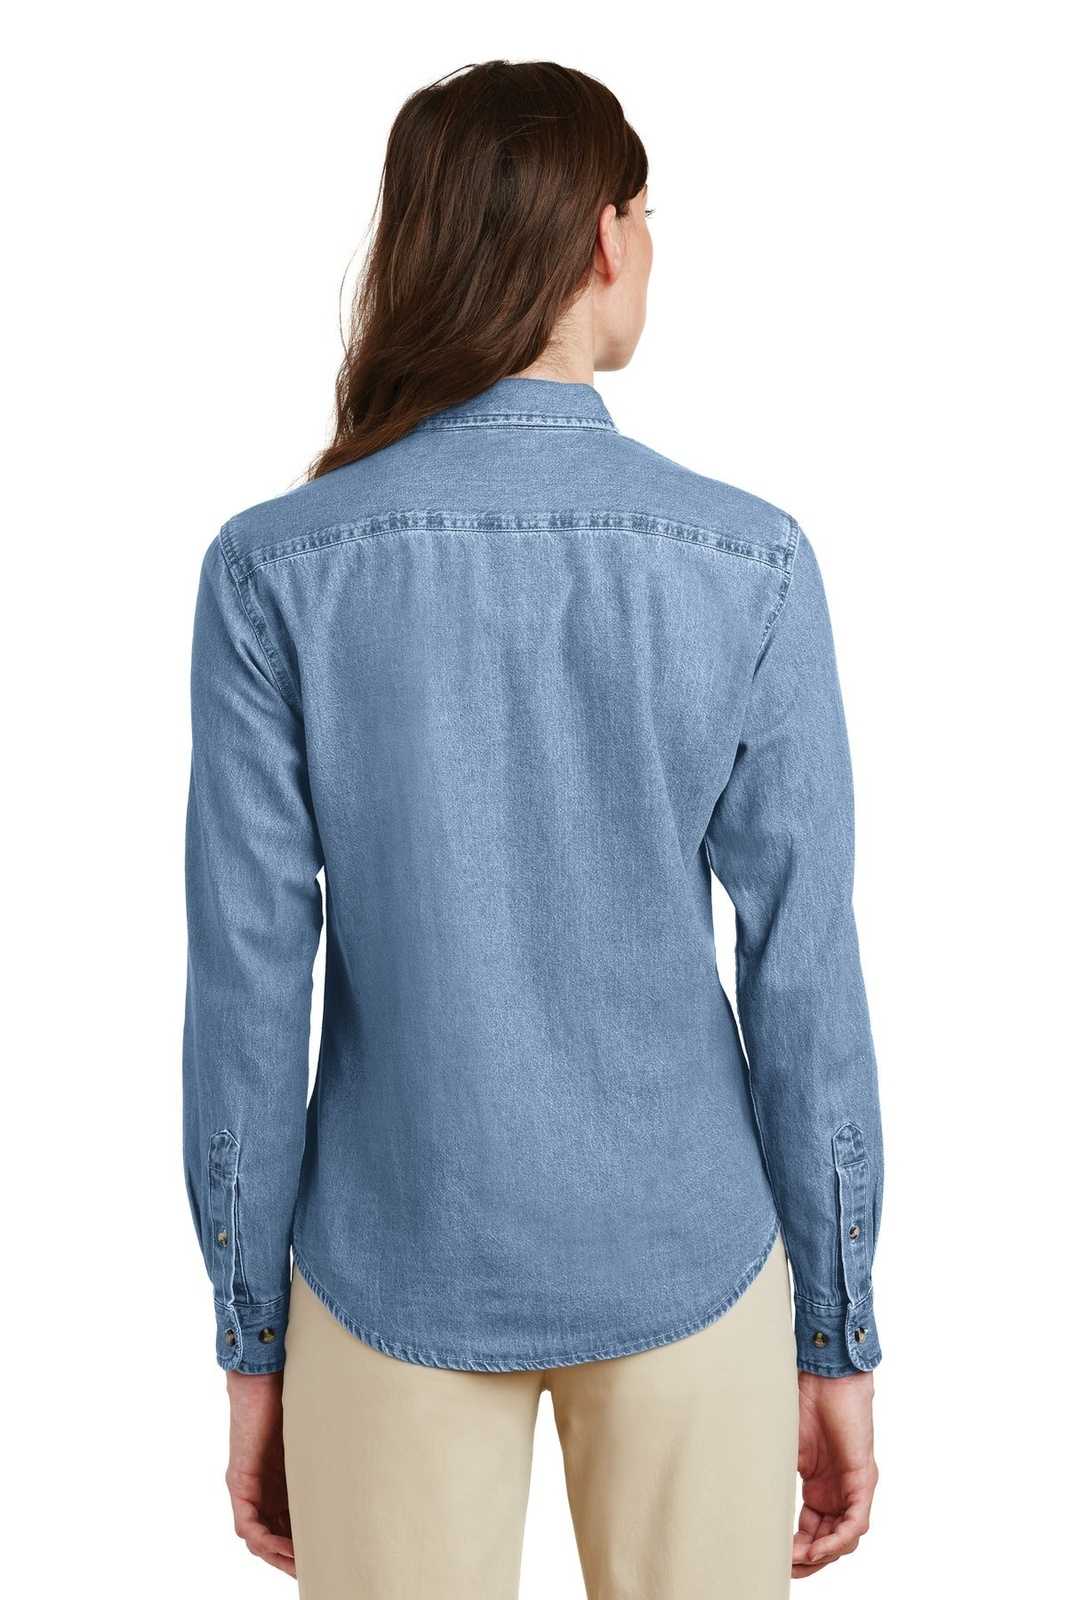 Port & Company LSP10 Ladies Long Sleeve Value Denim Shirt - Faded Blue - HIT a Double - 1